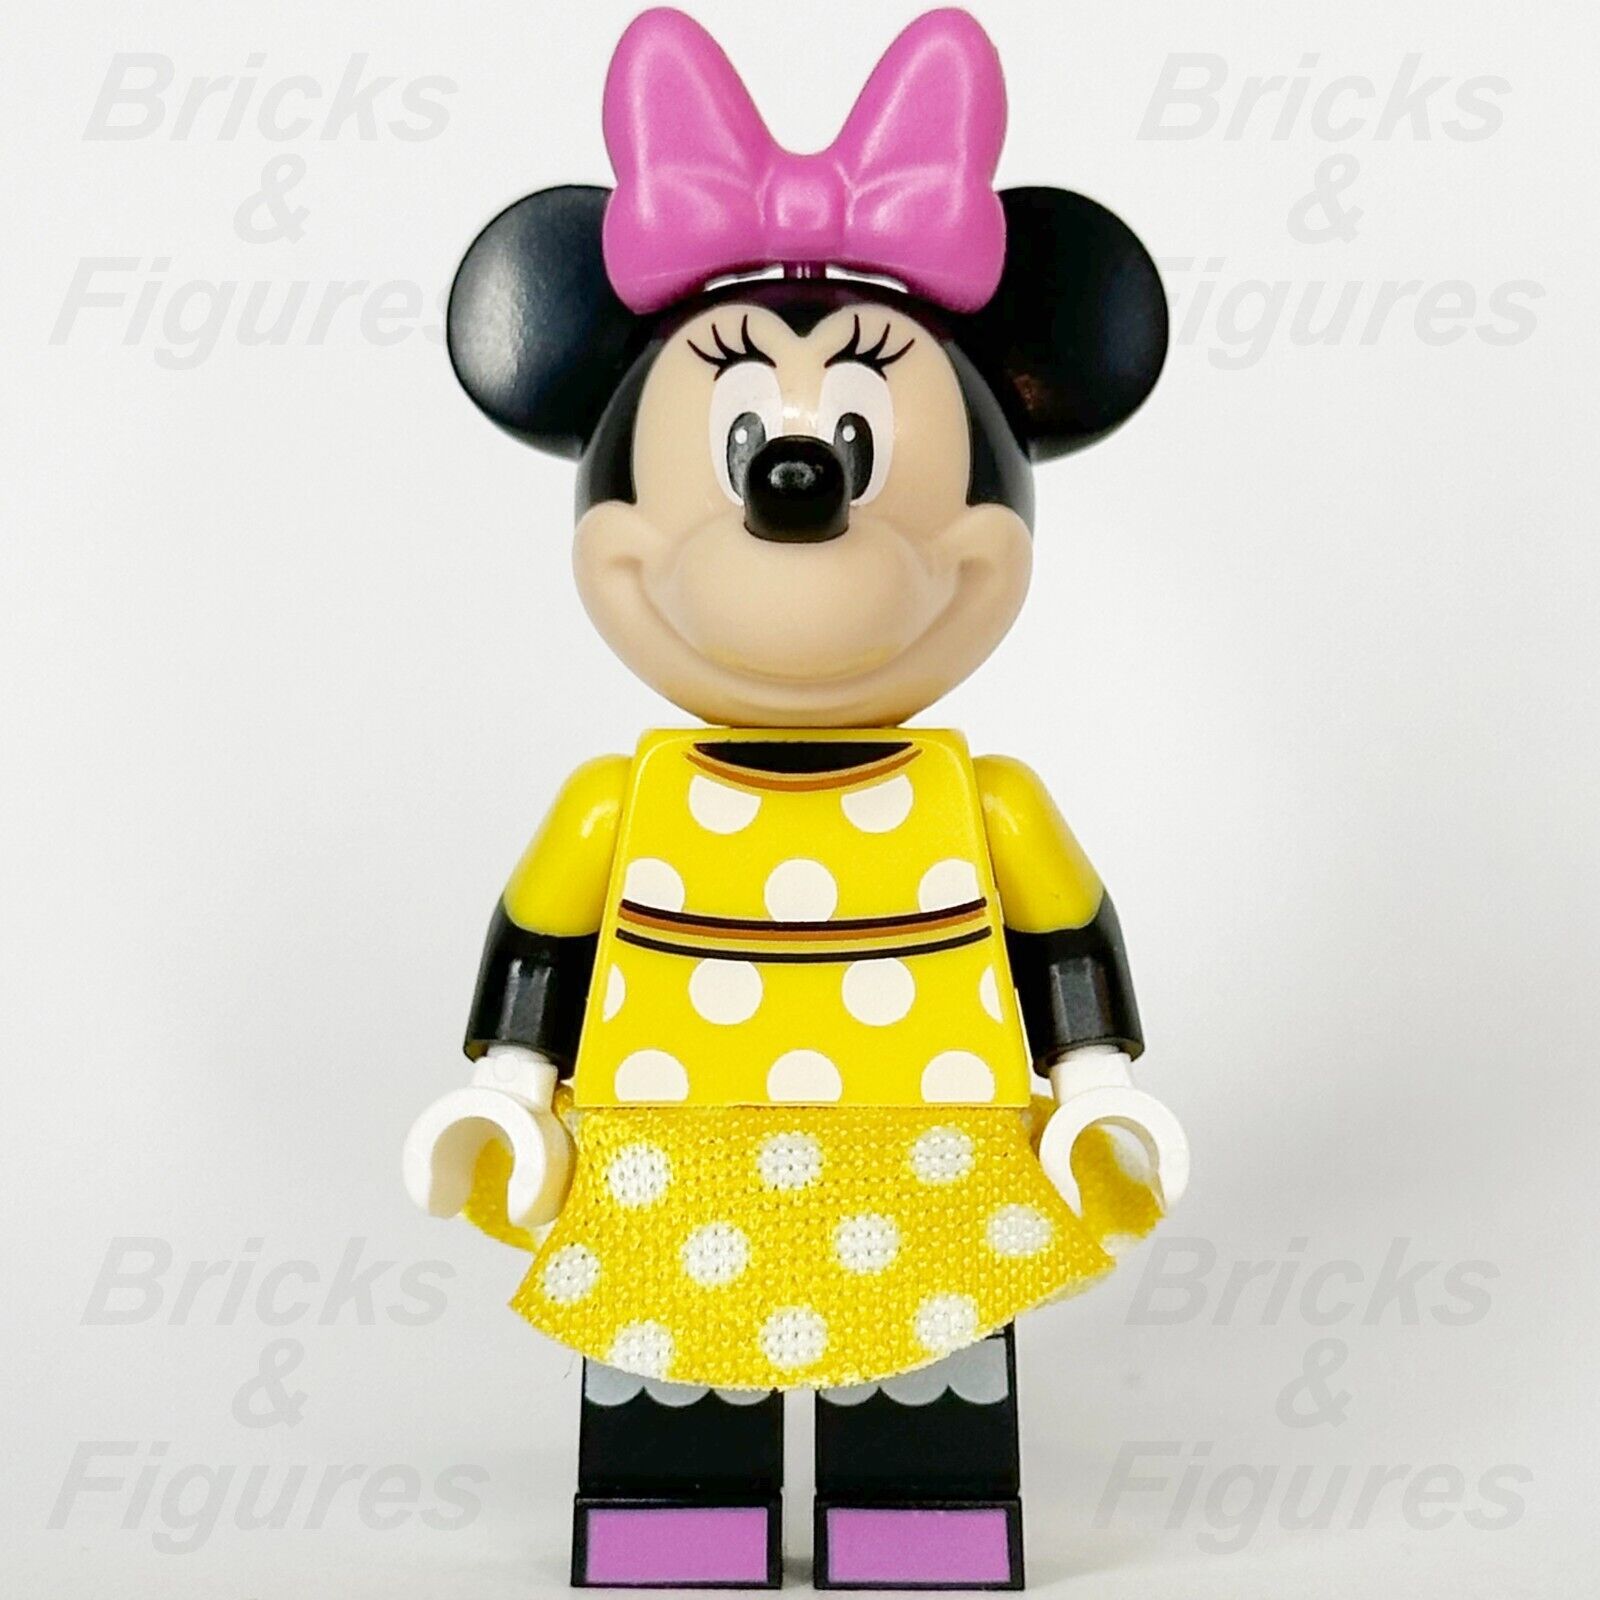 LEGO Disney Minnie Mouse Minifigure Mickey and Friends Yellow Dress 10773 dis056